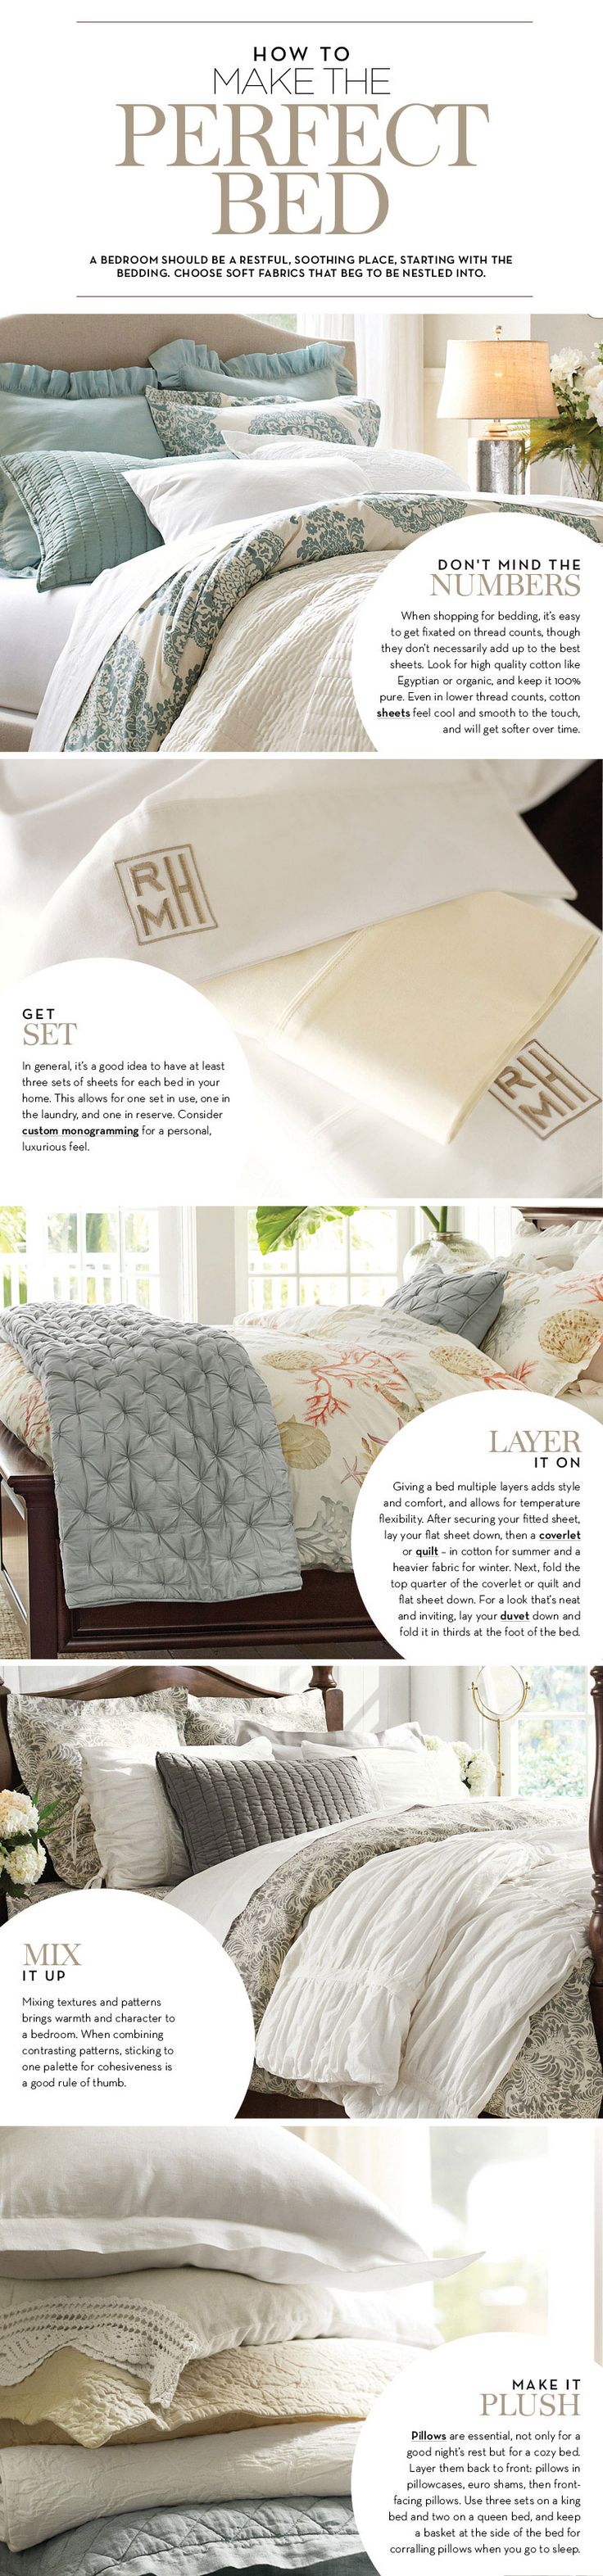 How to Make the Perfect Bed | Pottery Barn